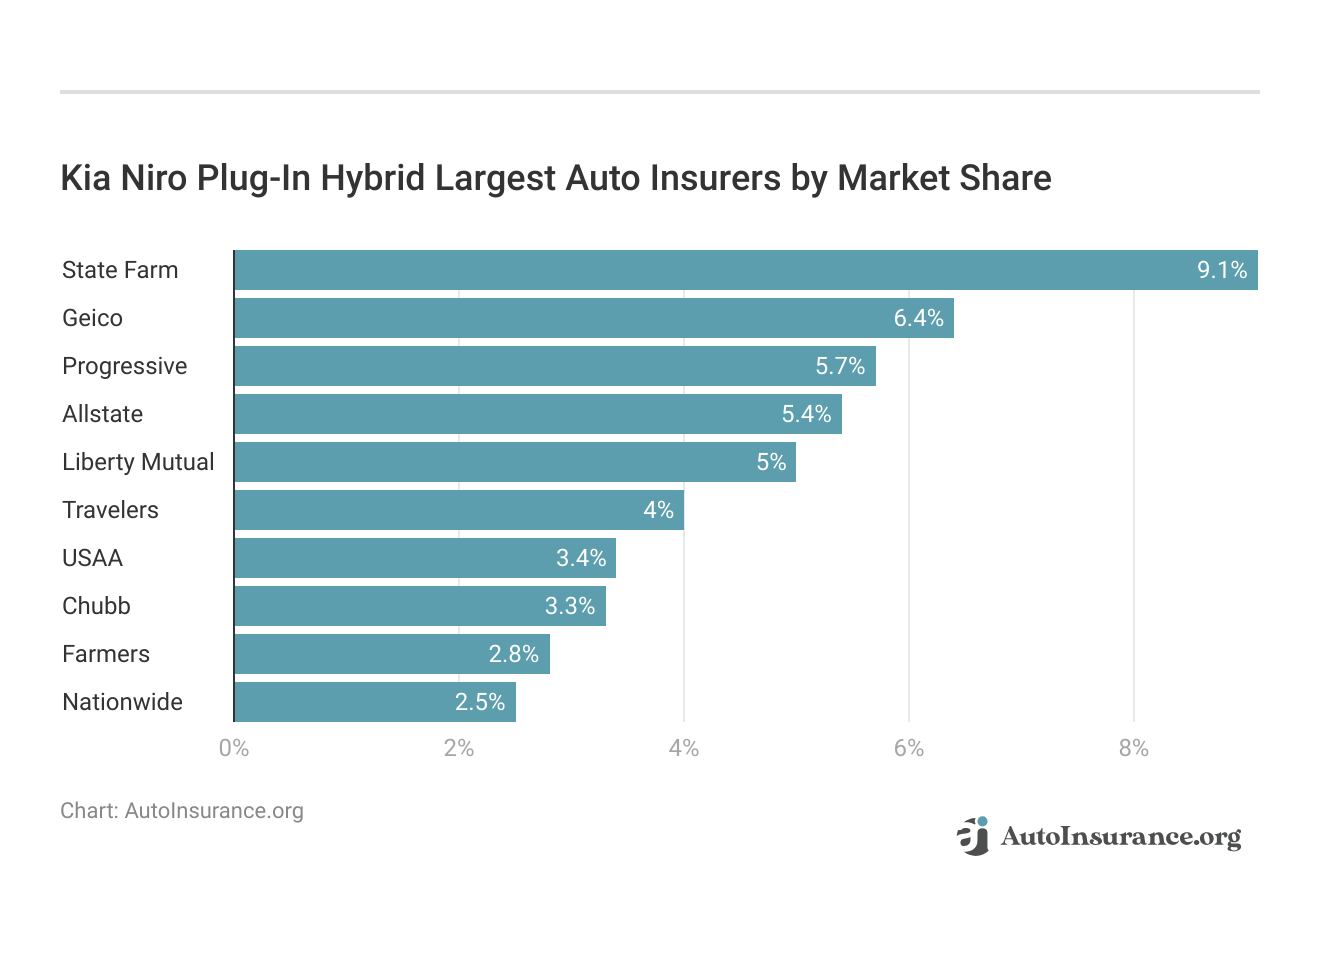 <h3>Kia Niro Plug-In Hybrid Largest Auto Insurers by Market Share</h3>